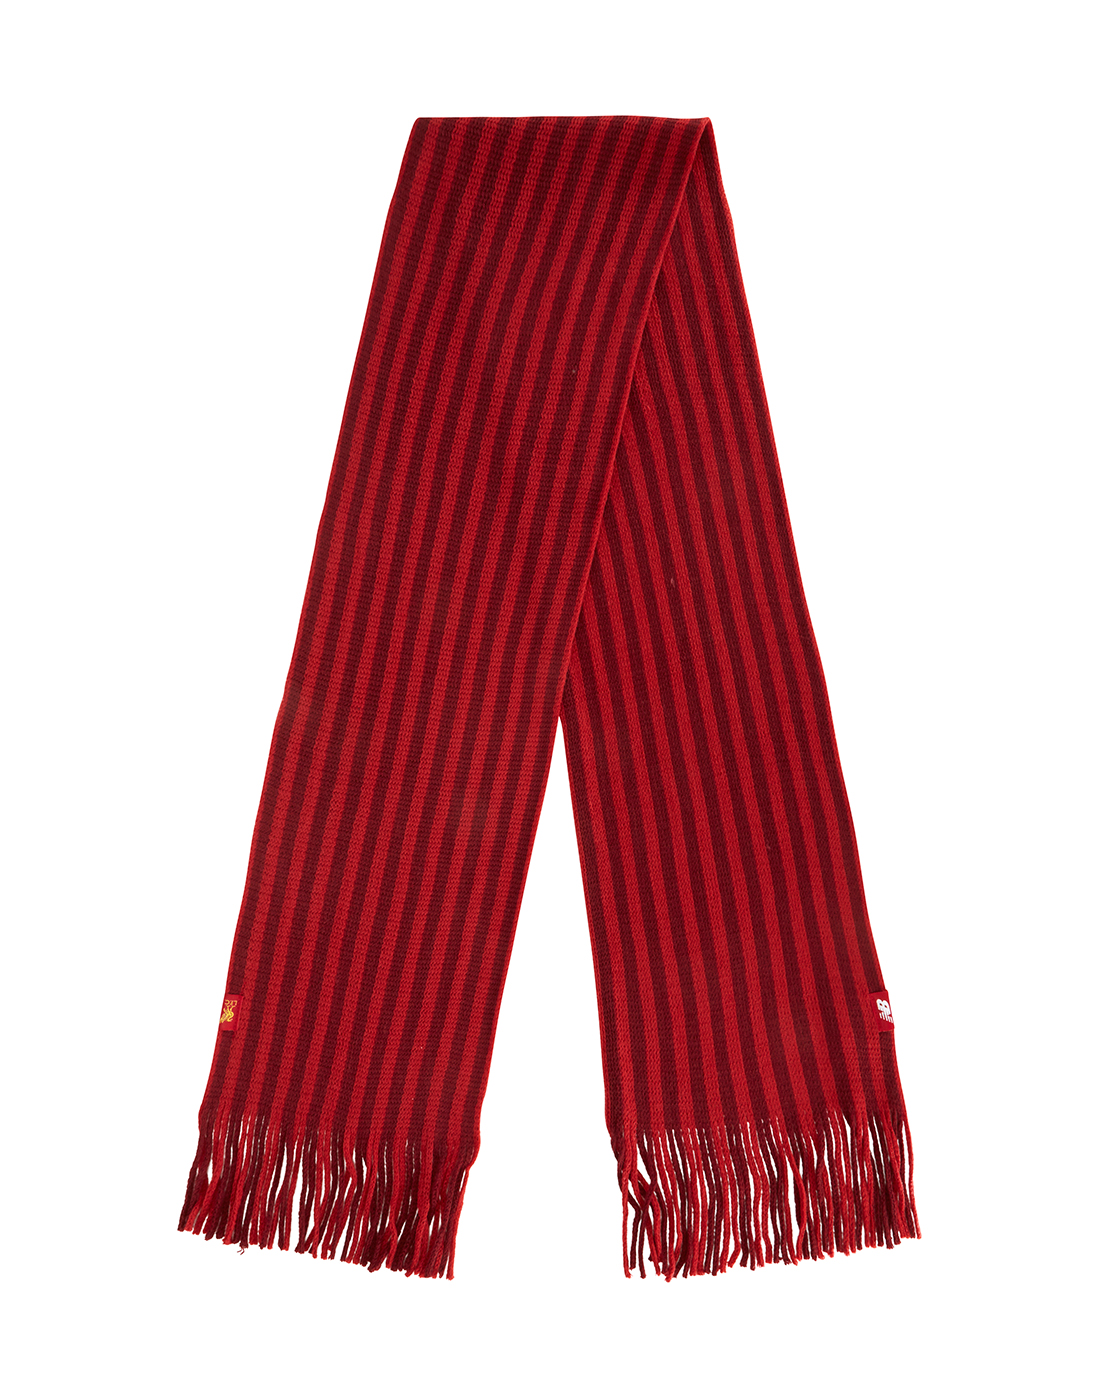 New Balance Liverpool Scarf - Red | Life Style Sports IE